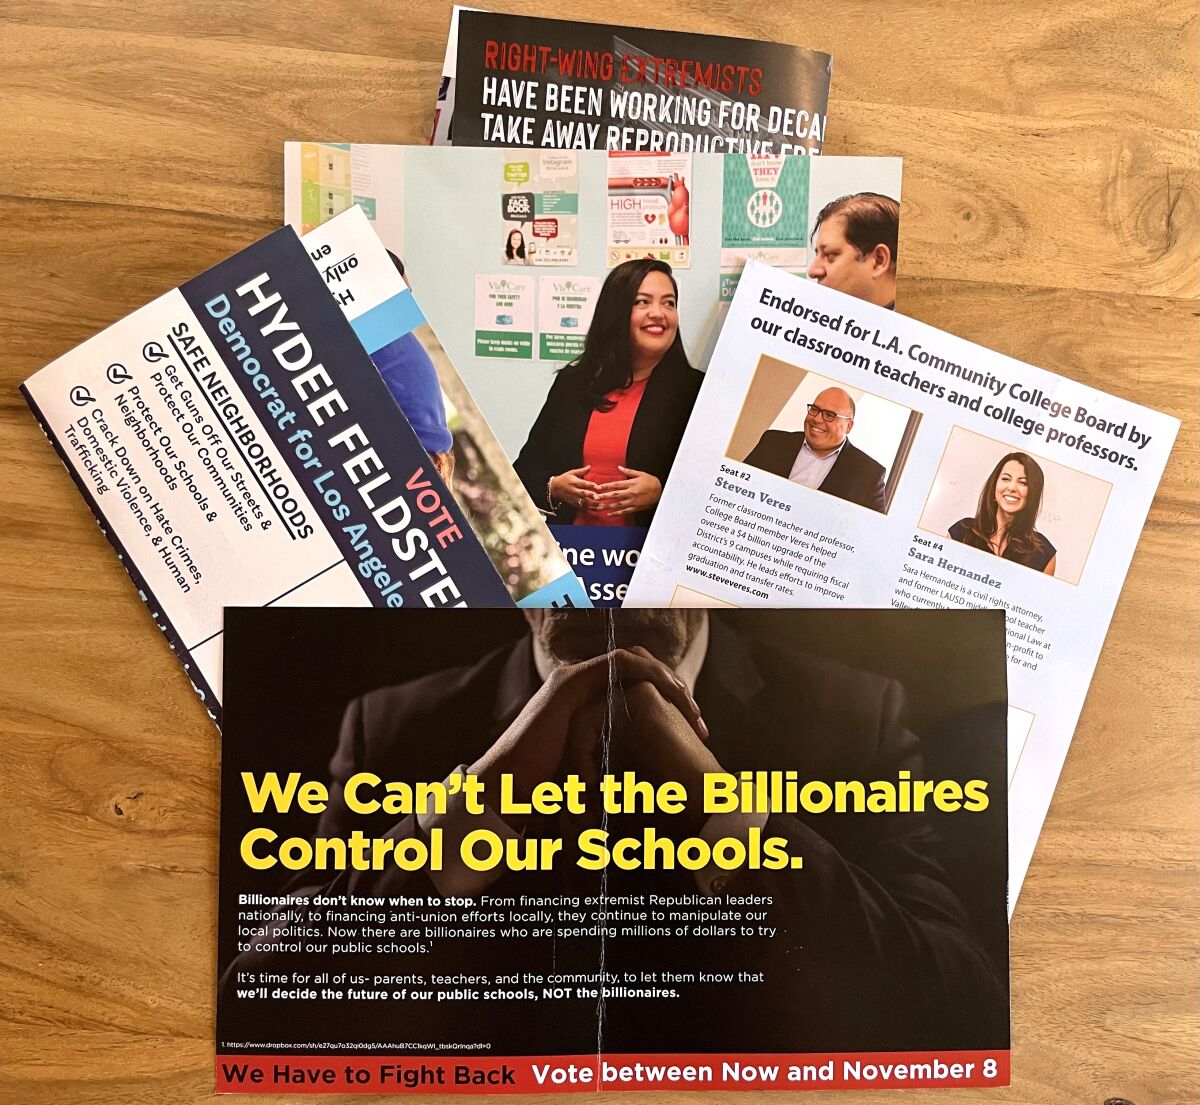 Political flyers in the mail: how to stop receiving them?